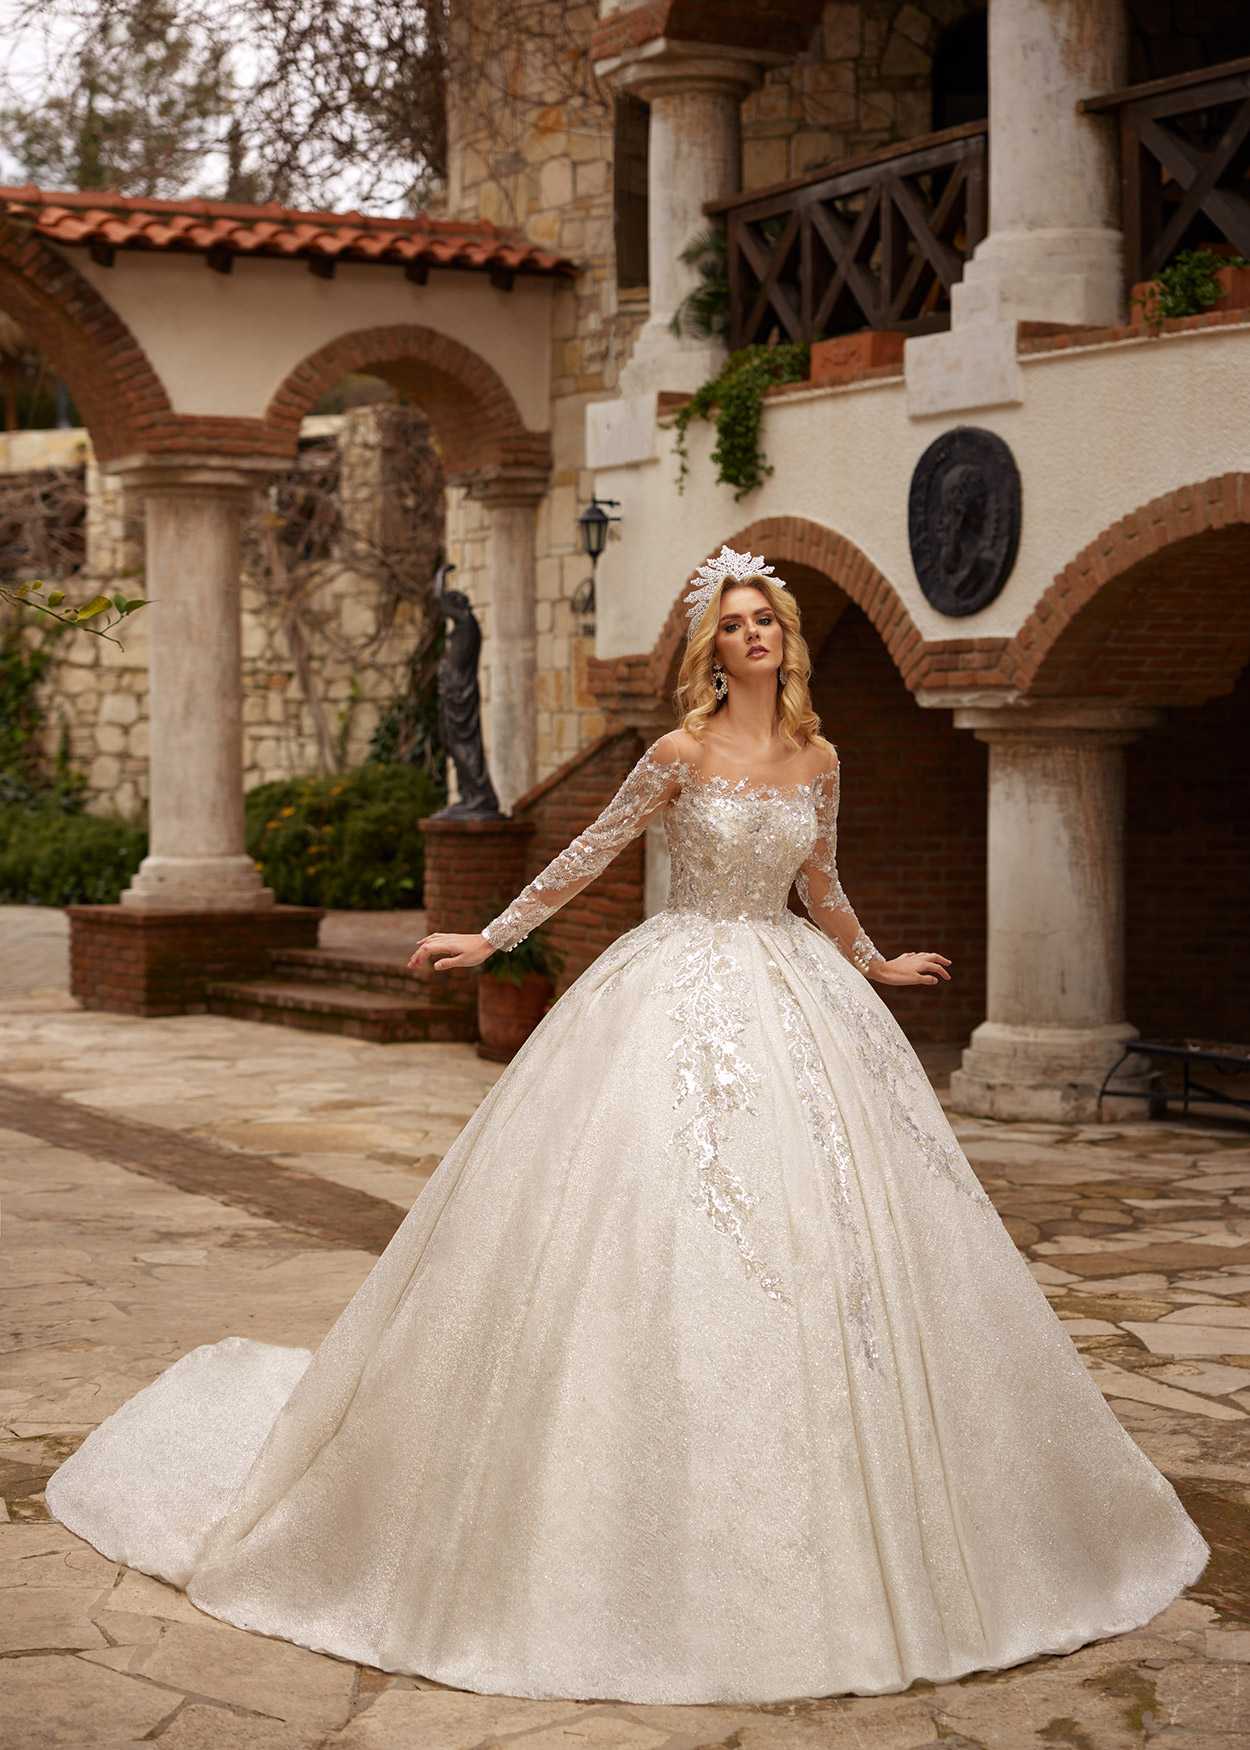 buy Illusion Neckline Sequined Embellished Lace Ball Gown Wedding Dress with Illusion Sleeves